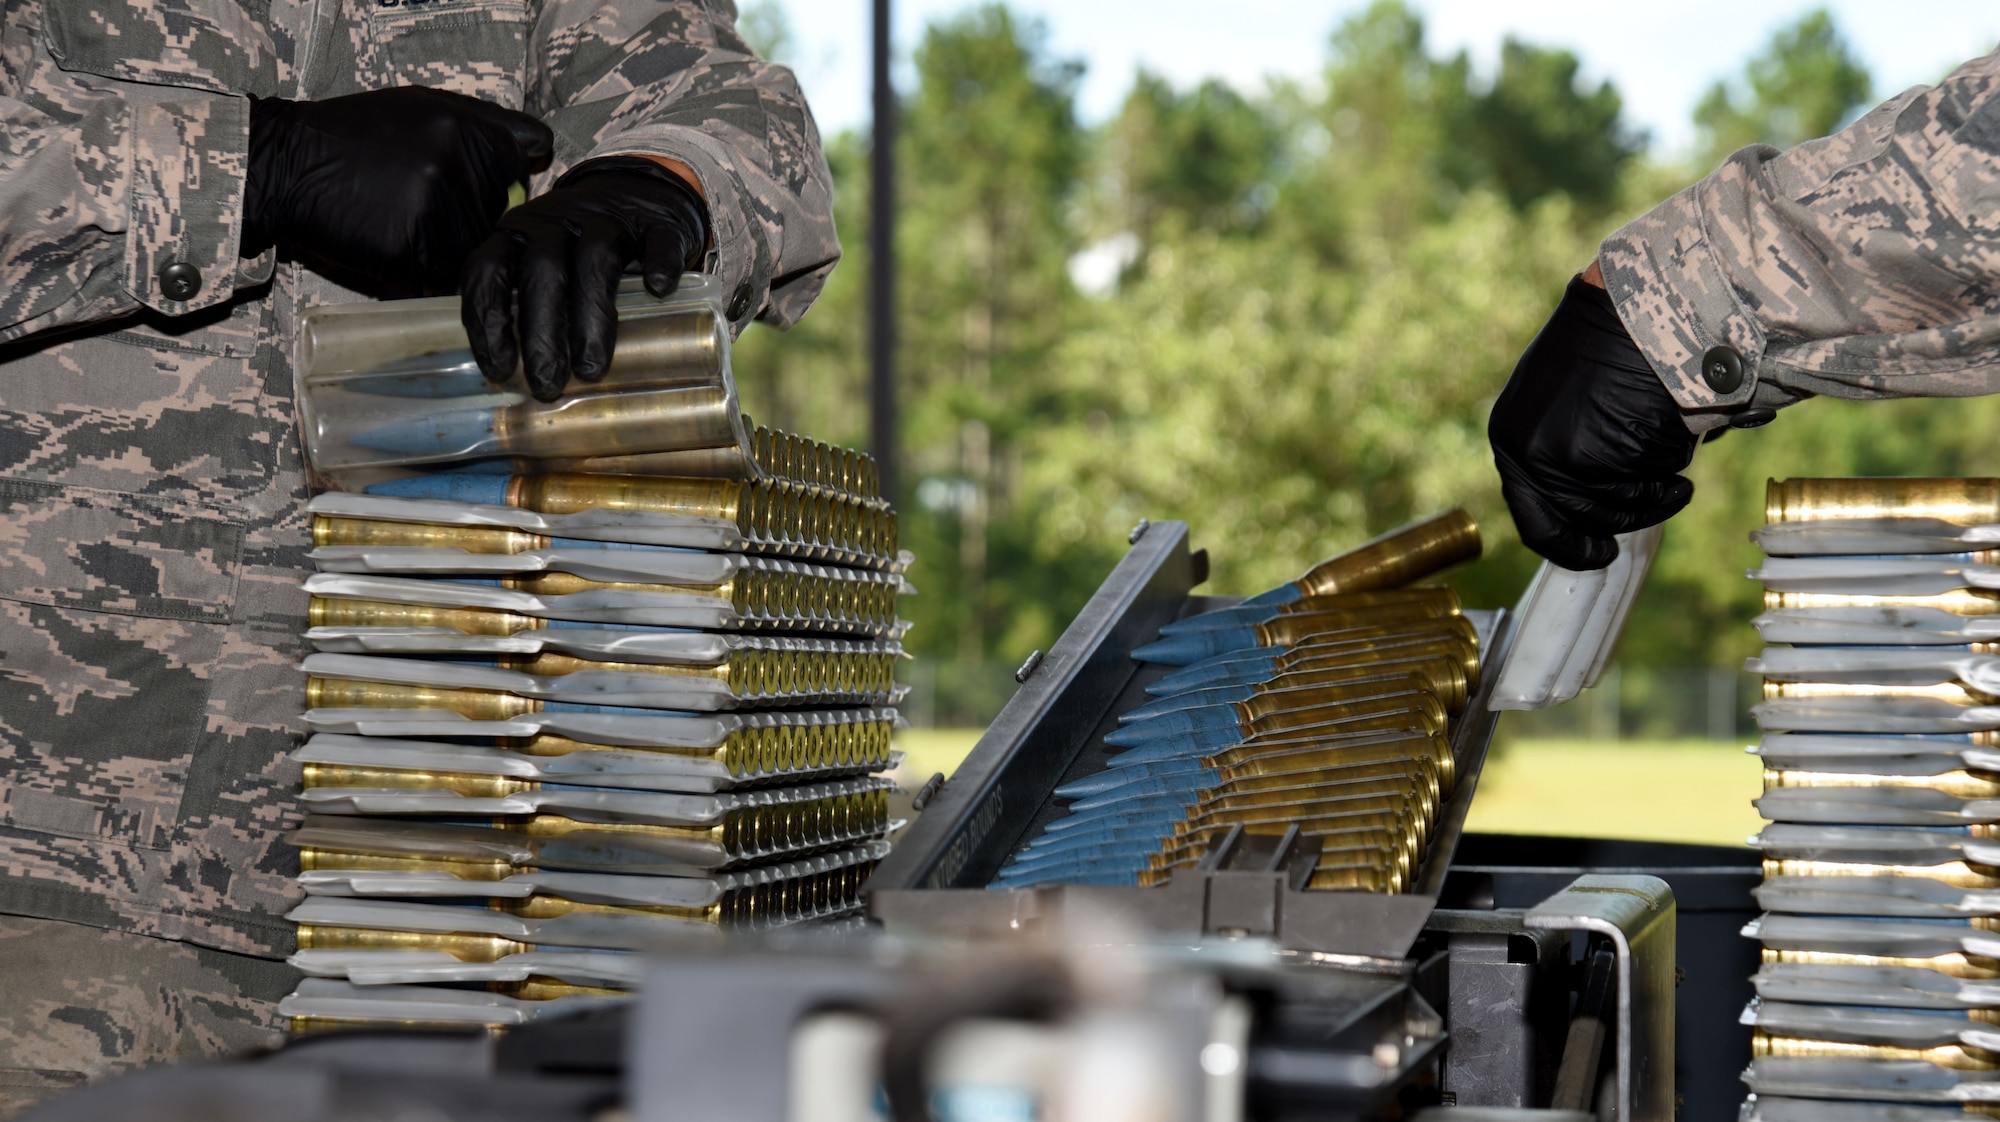 U.S. Air Force Senior Airmen Zachary Manzella, left, and Alexander Keck-Leedy, 20th Equipment Maintenance Squadron (EMS) conventional maintenance crew chiefs, load 20 mm rounds into a universal ammunition loading (UAL) system at Shaw Air Force Base, S.C., July 10, 2018.